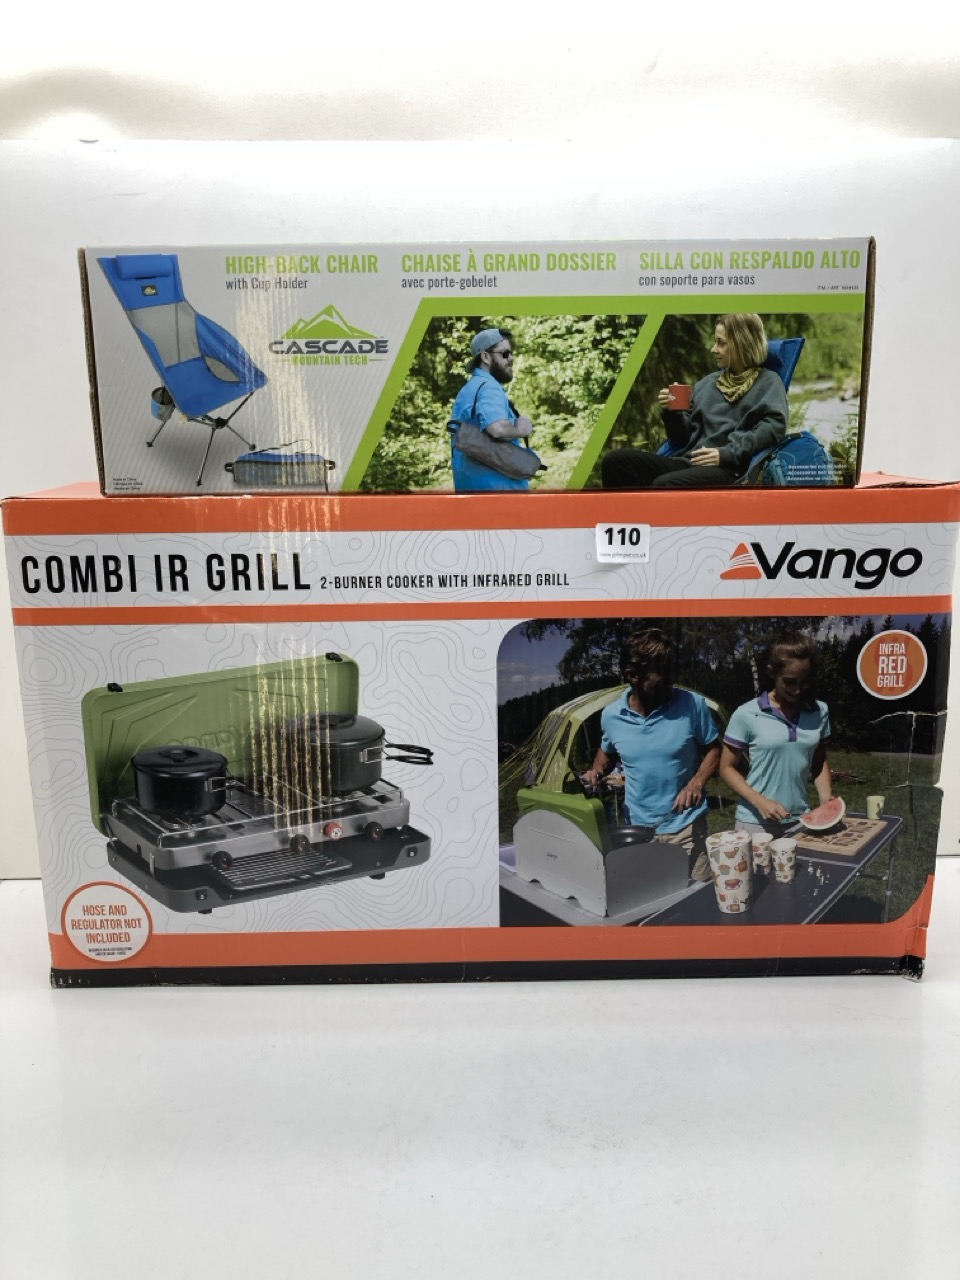 A VANGO COMBI IR 2 X BURNER GRILL TOGETHER WITH A CASCADE MOUNTAIN 183360492 HIGH BACK CHAIR WITH CUP HOLDER